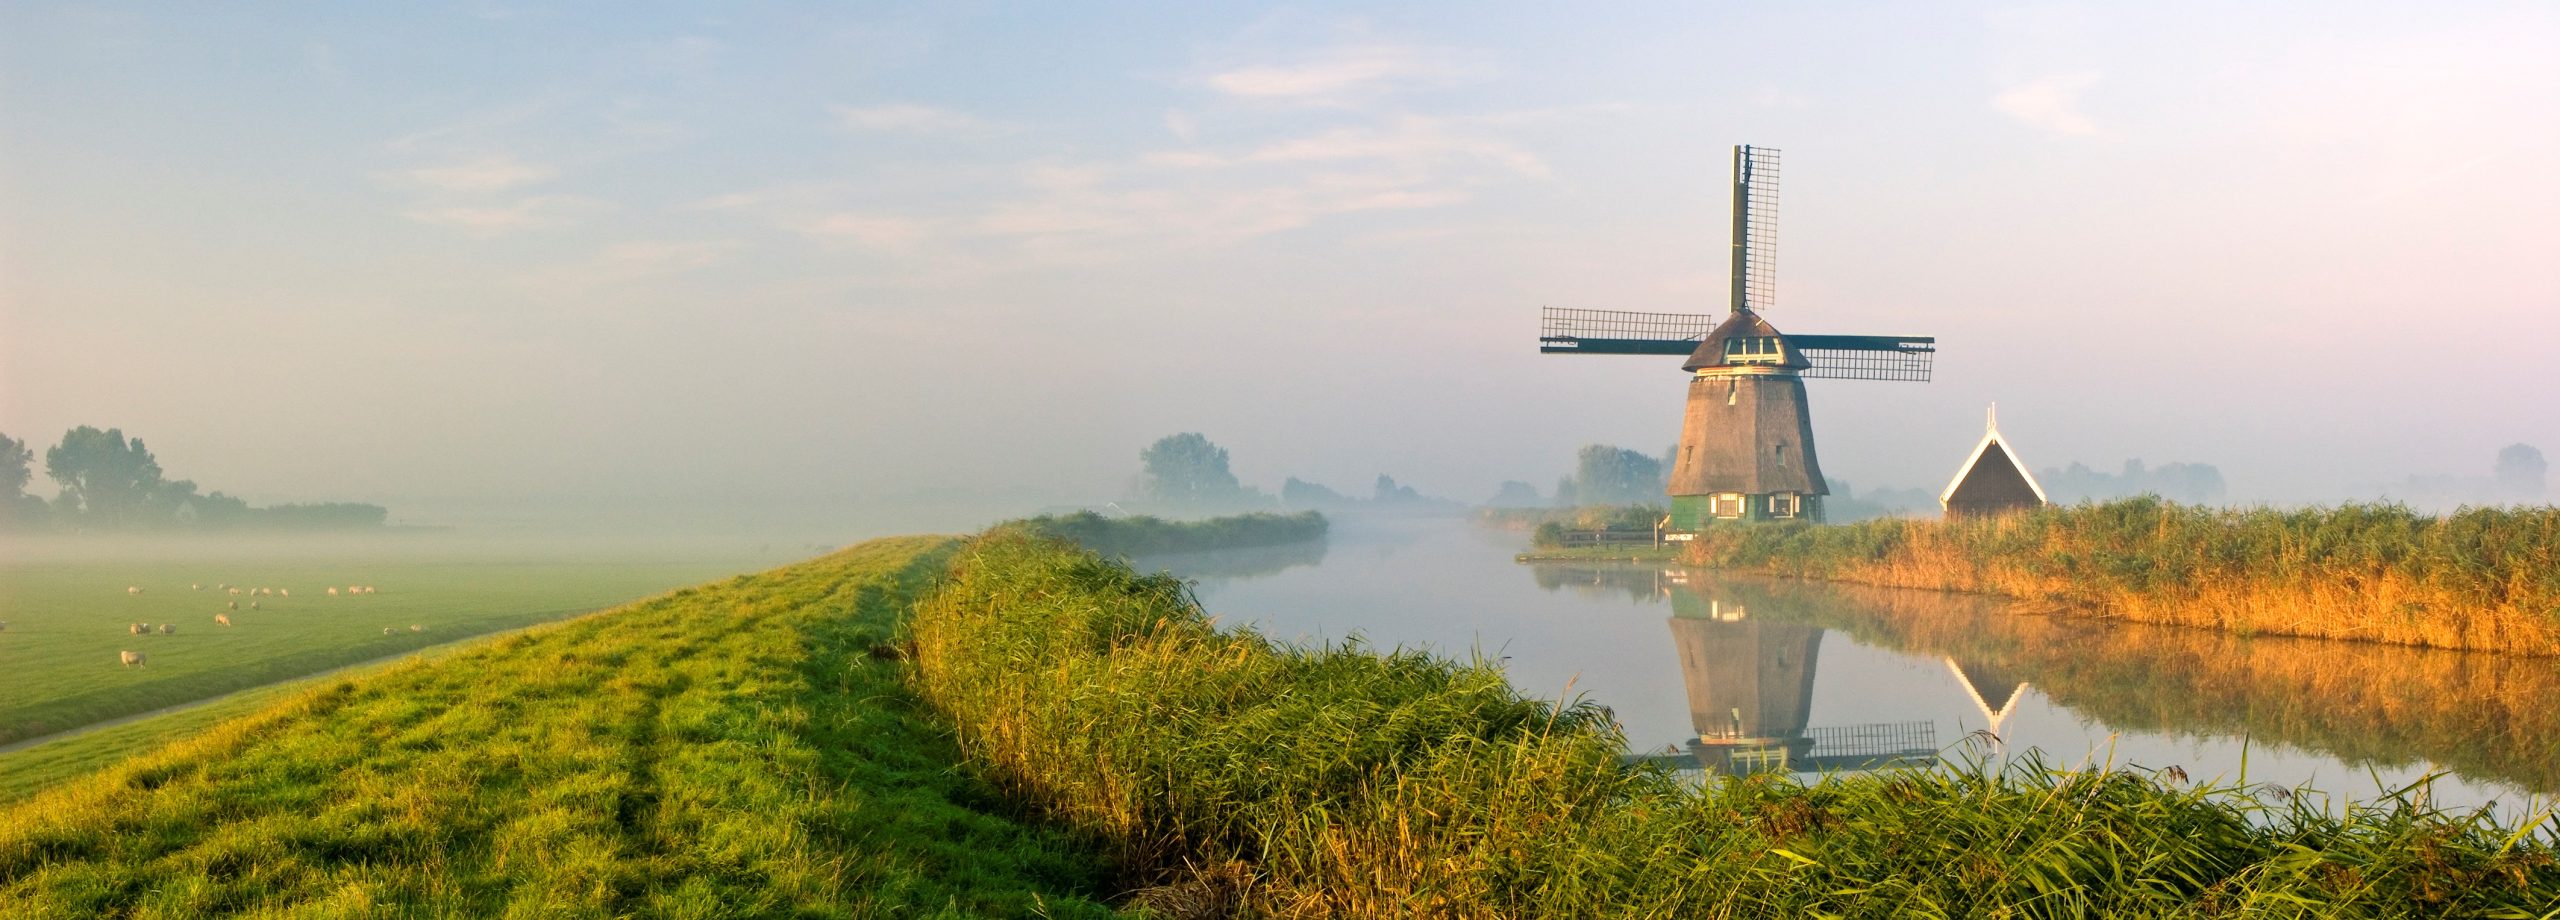 a windmill next to a canal and a levee with a green field with sheep during sunrise